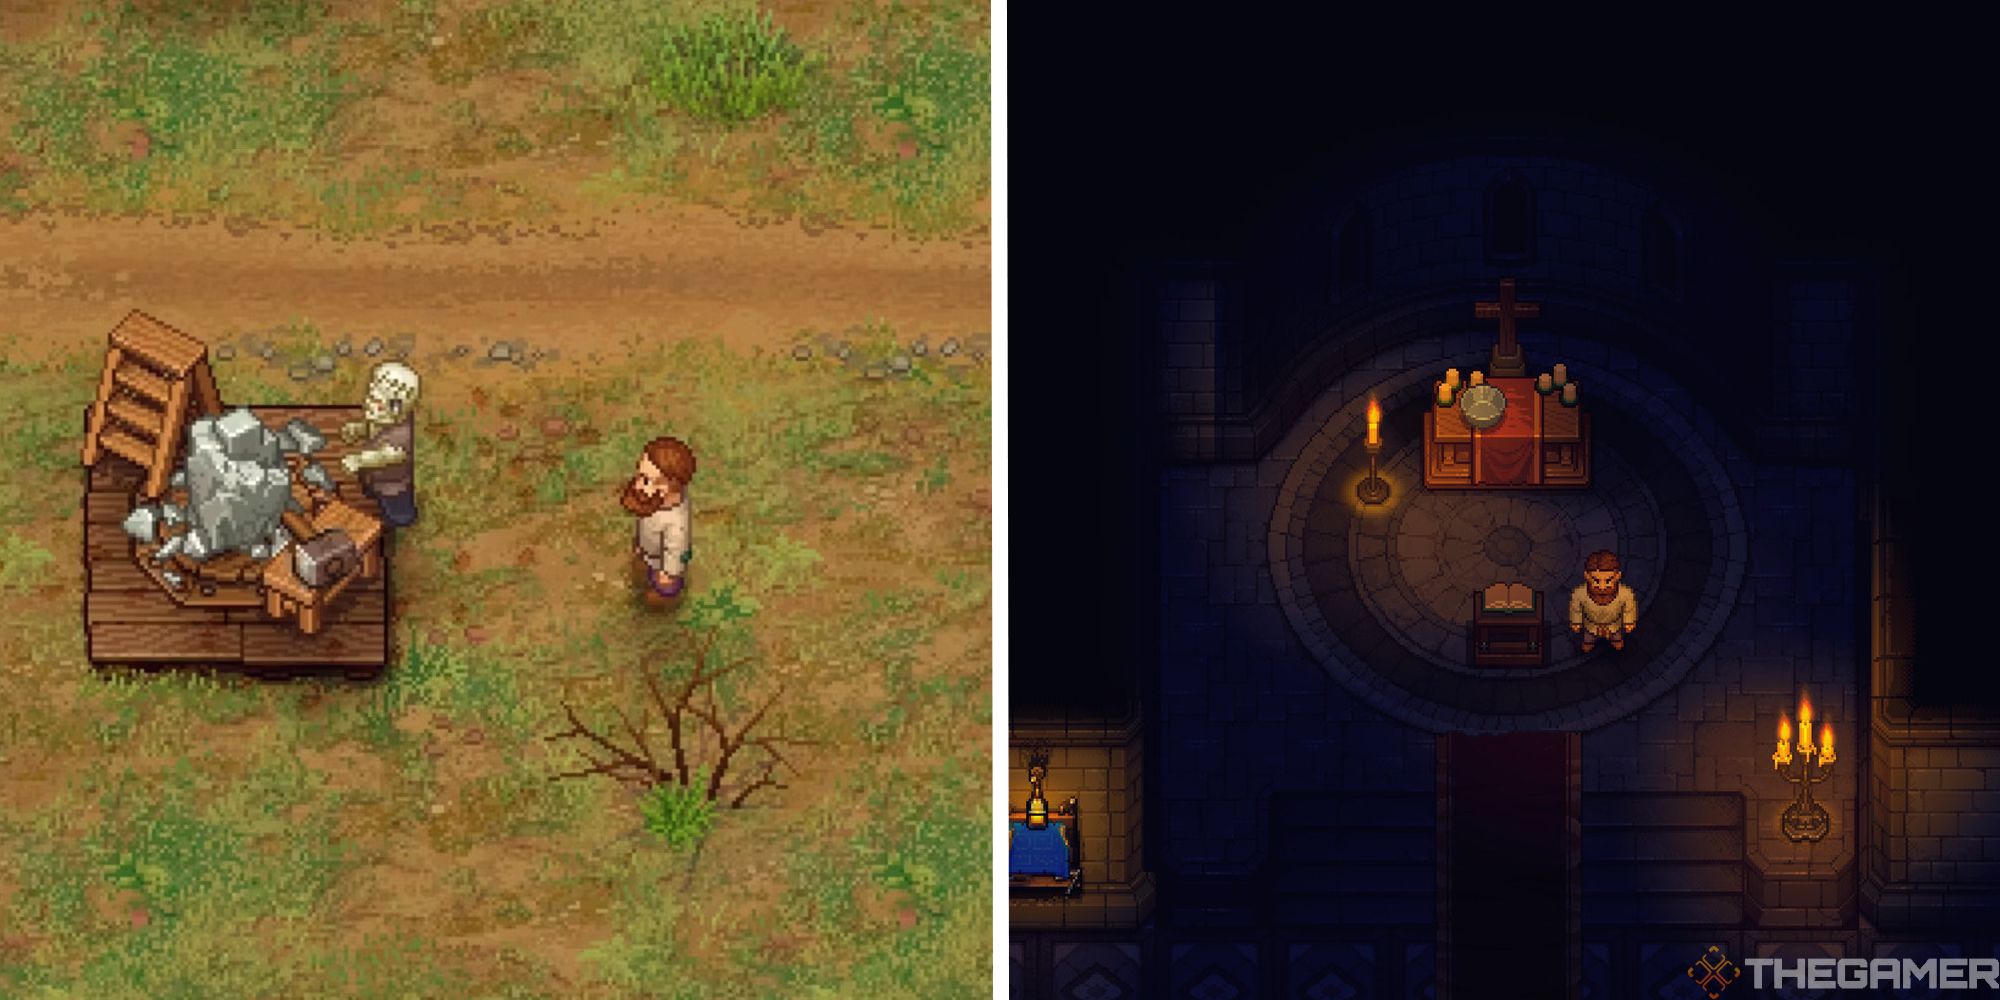 graveyard keeper split image showing player at crafting station next to image of player in dark church